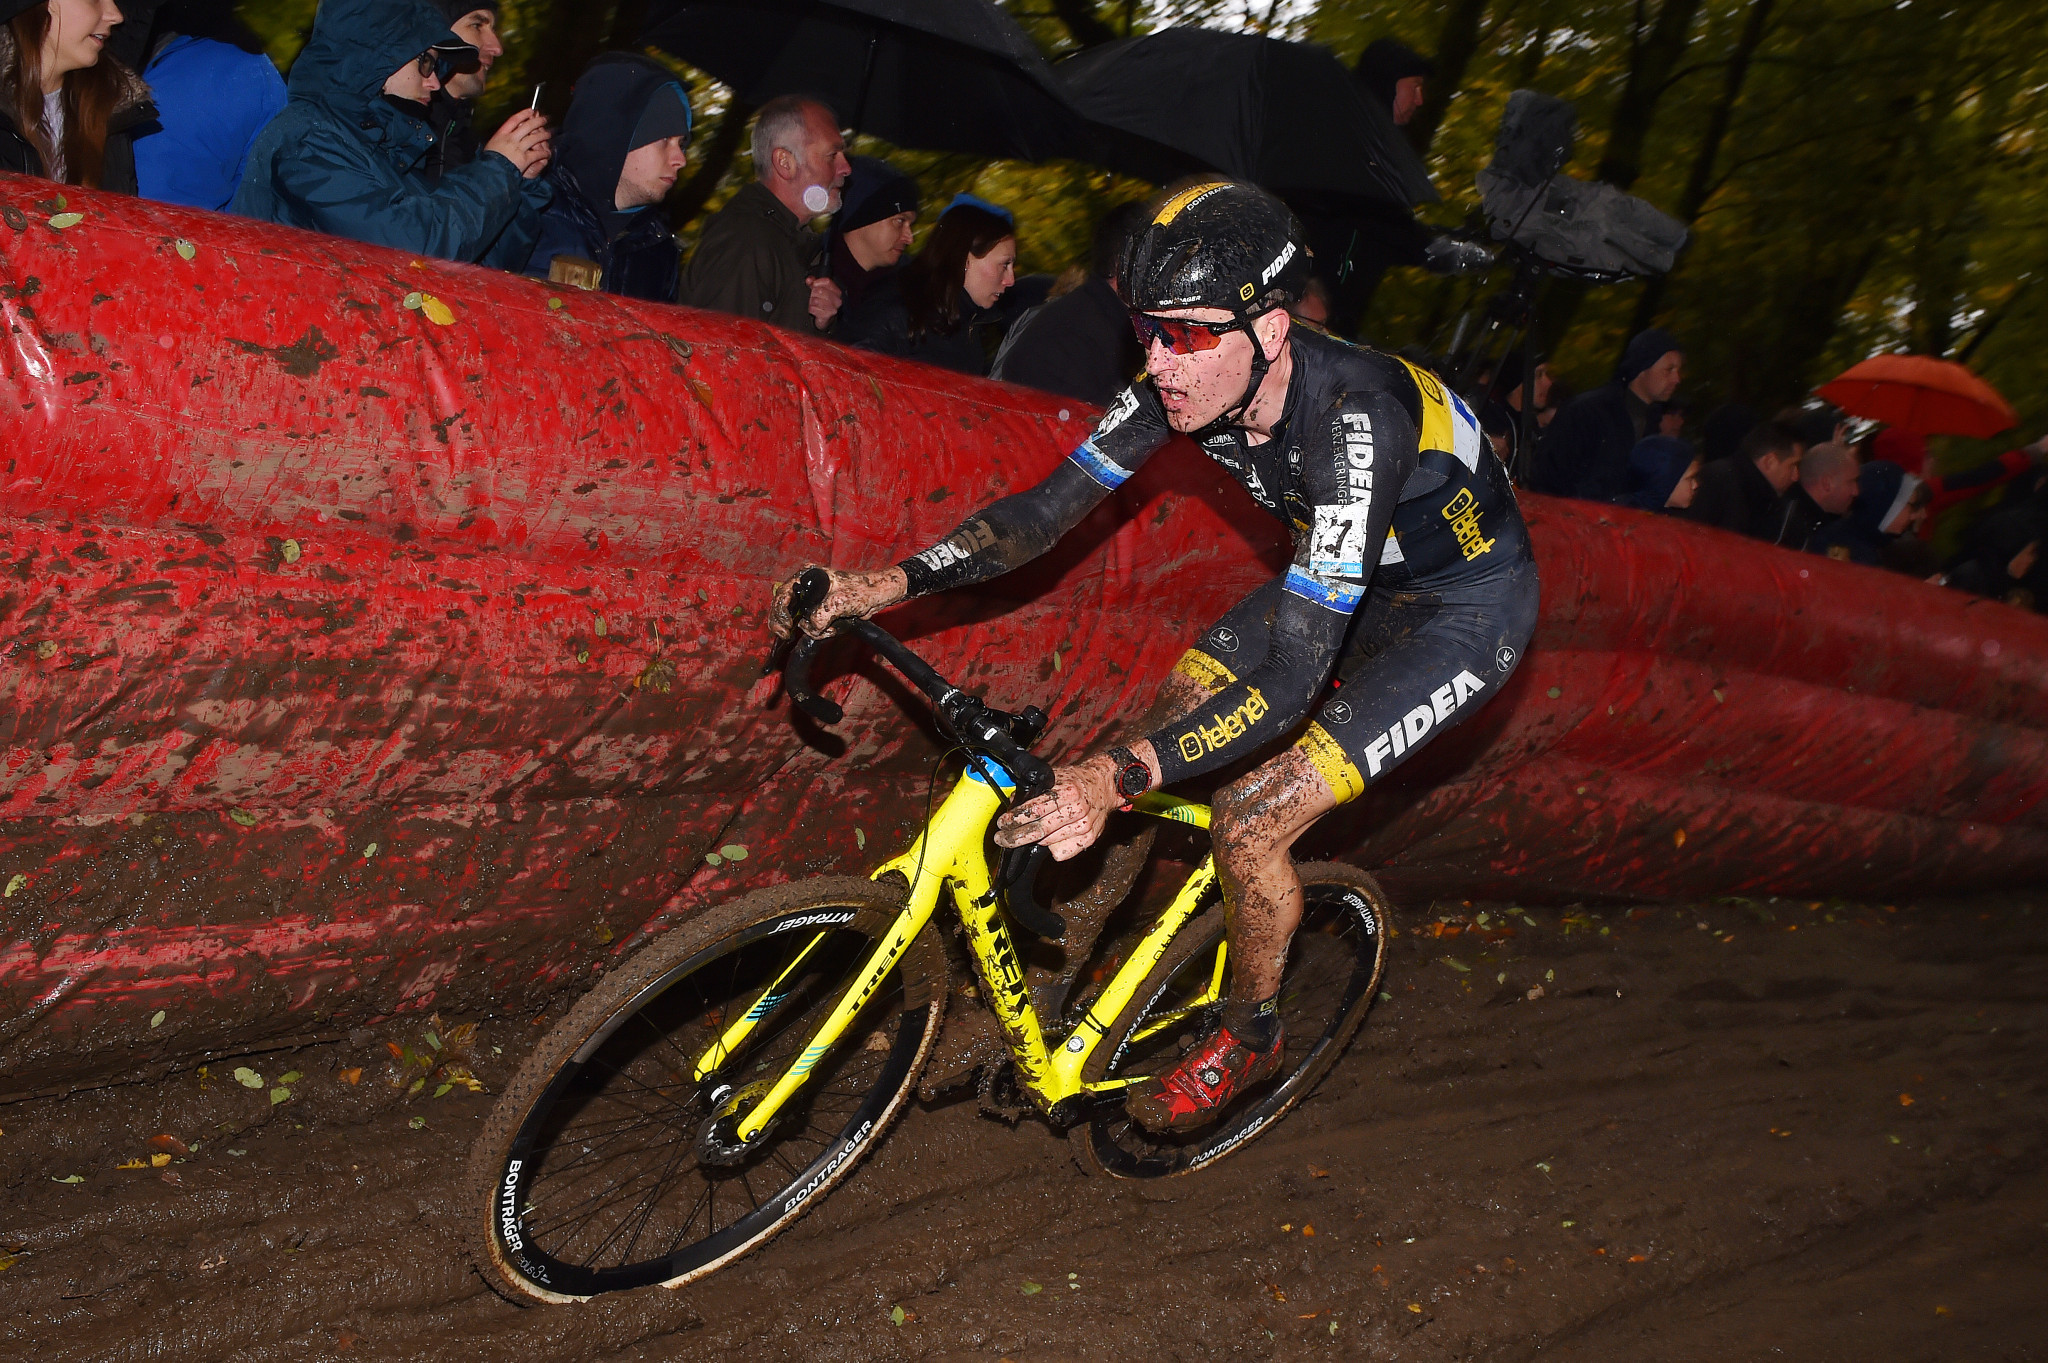 Van der Poel looking to continue imperious form as UCI Cyclo-Cross World Cup heads to Namur